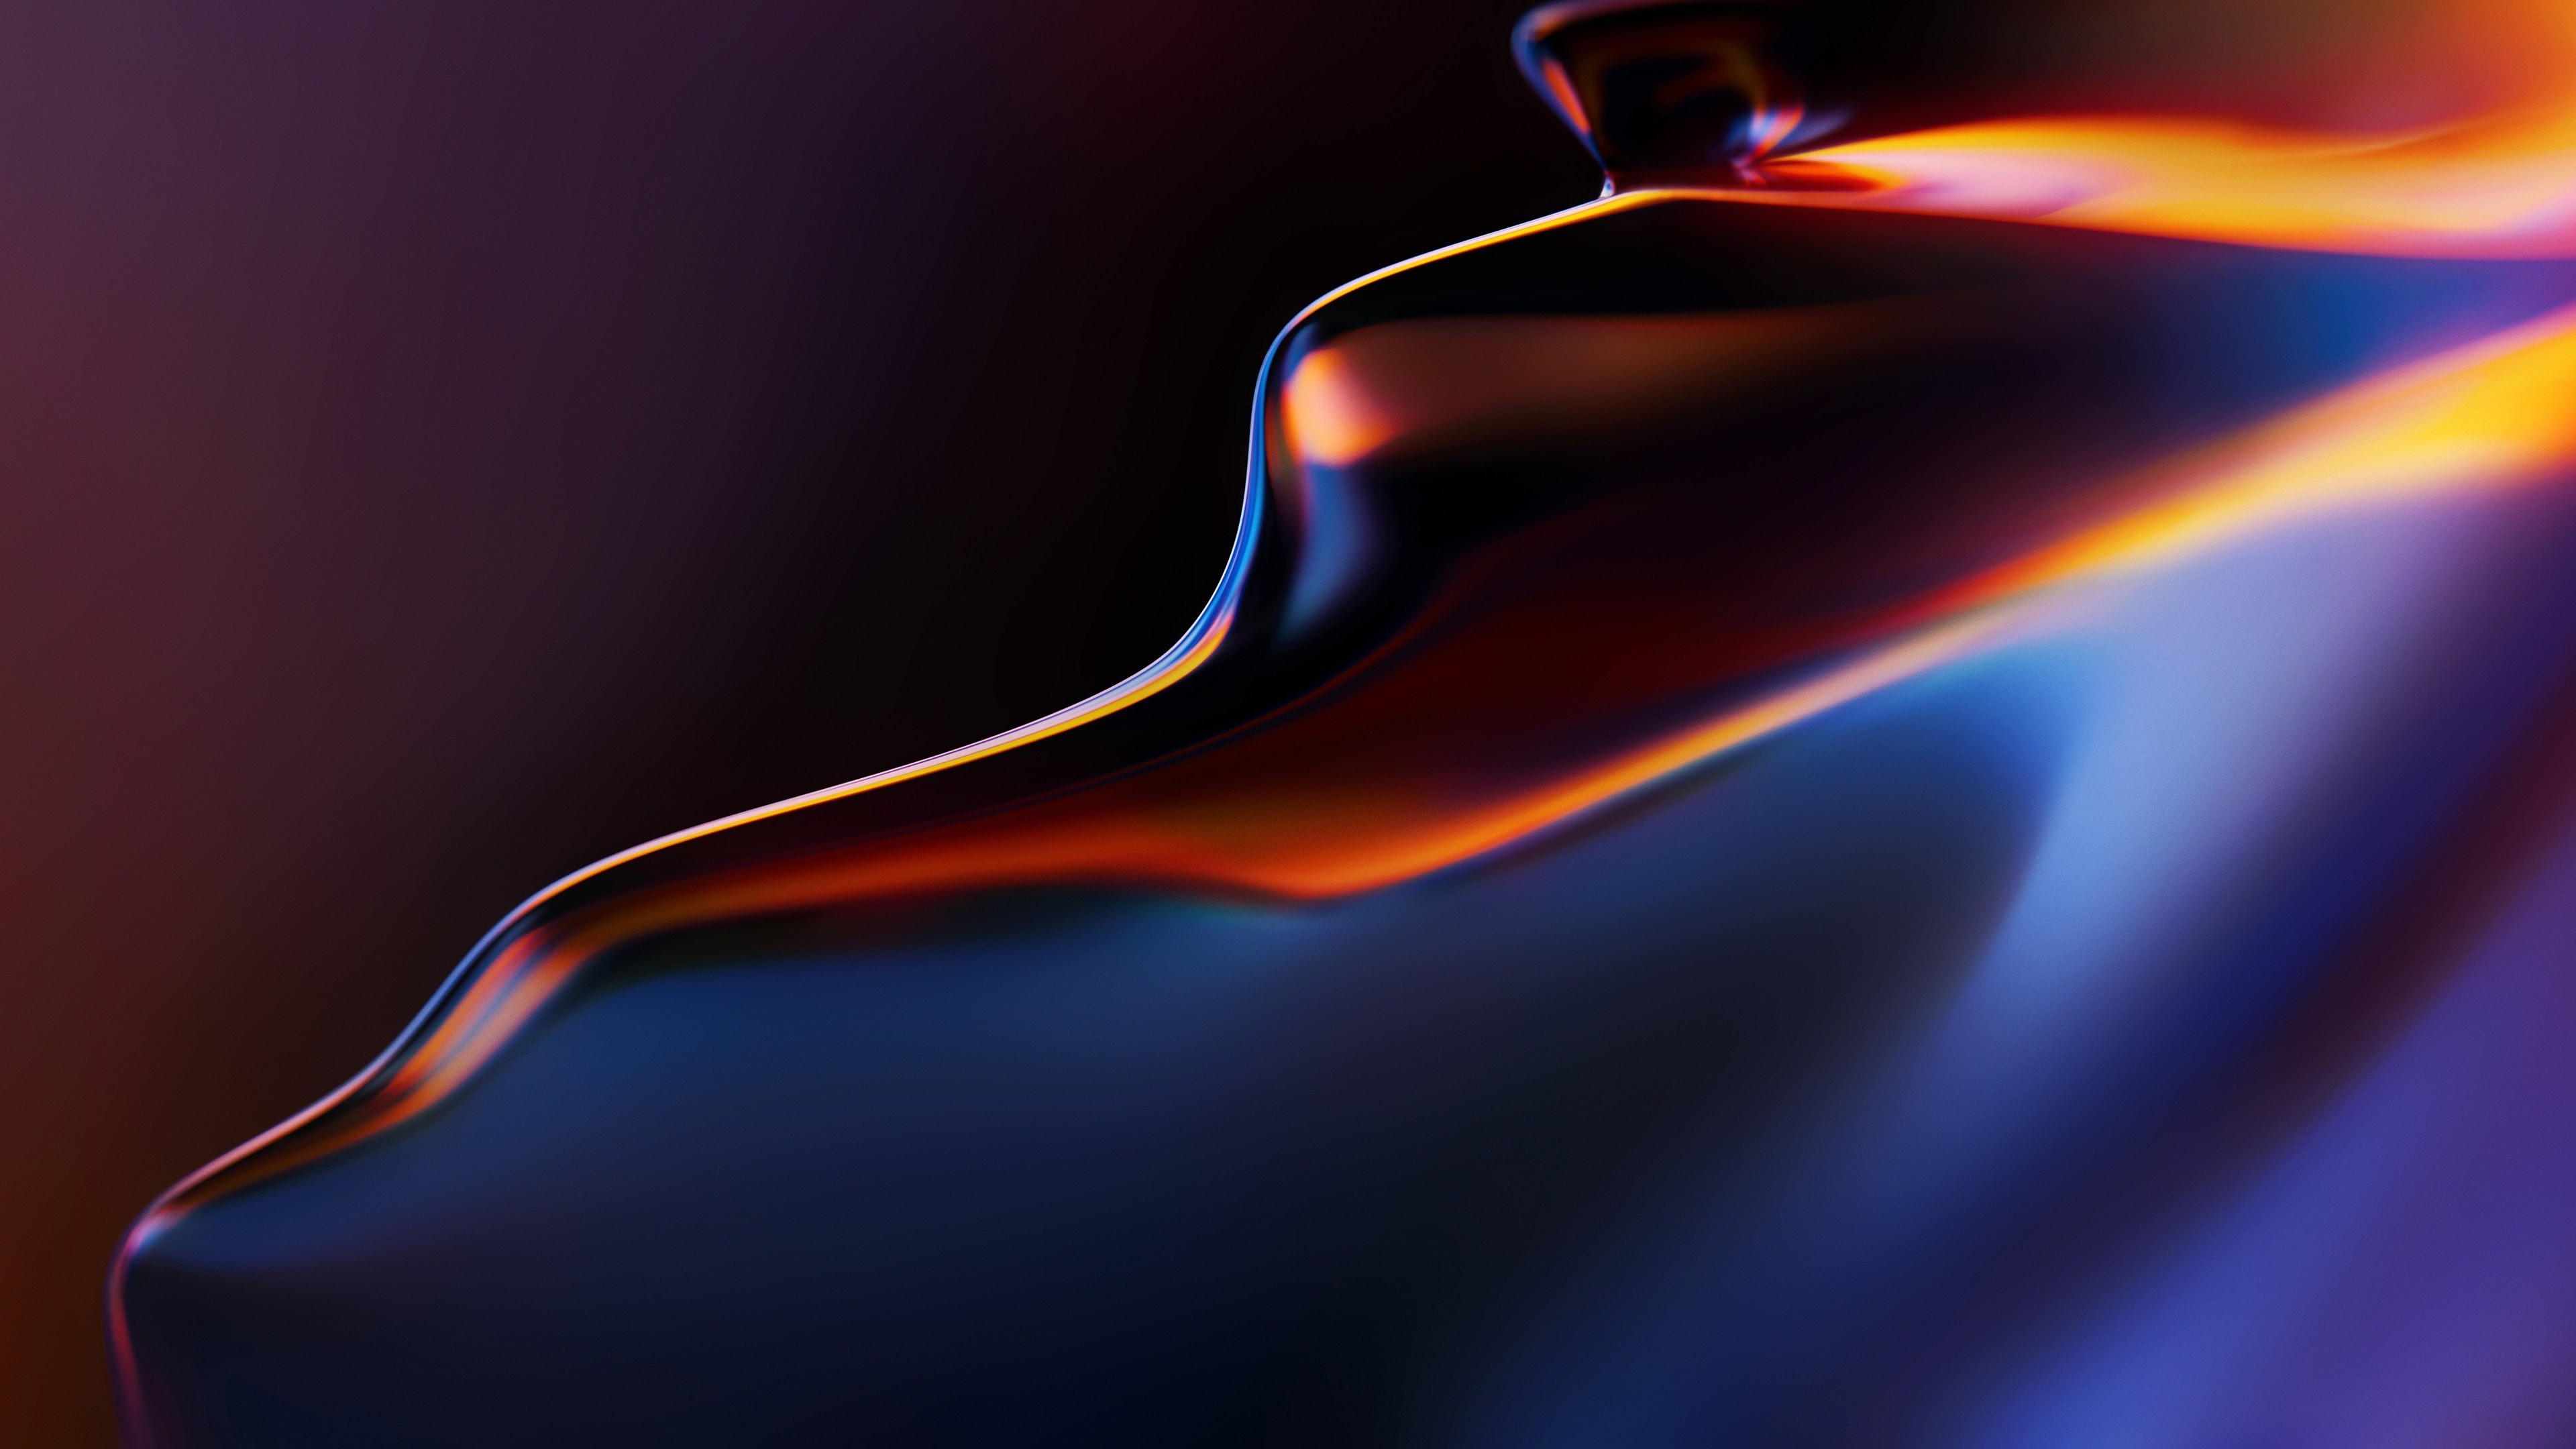 Abstract, flow, OnePlus 6T wallpaper 3840x2160